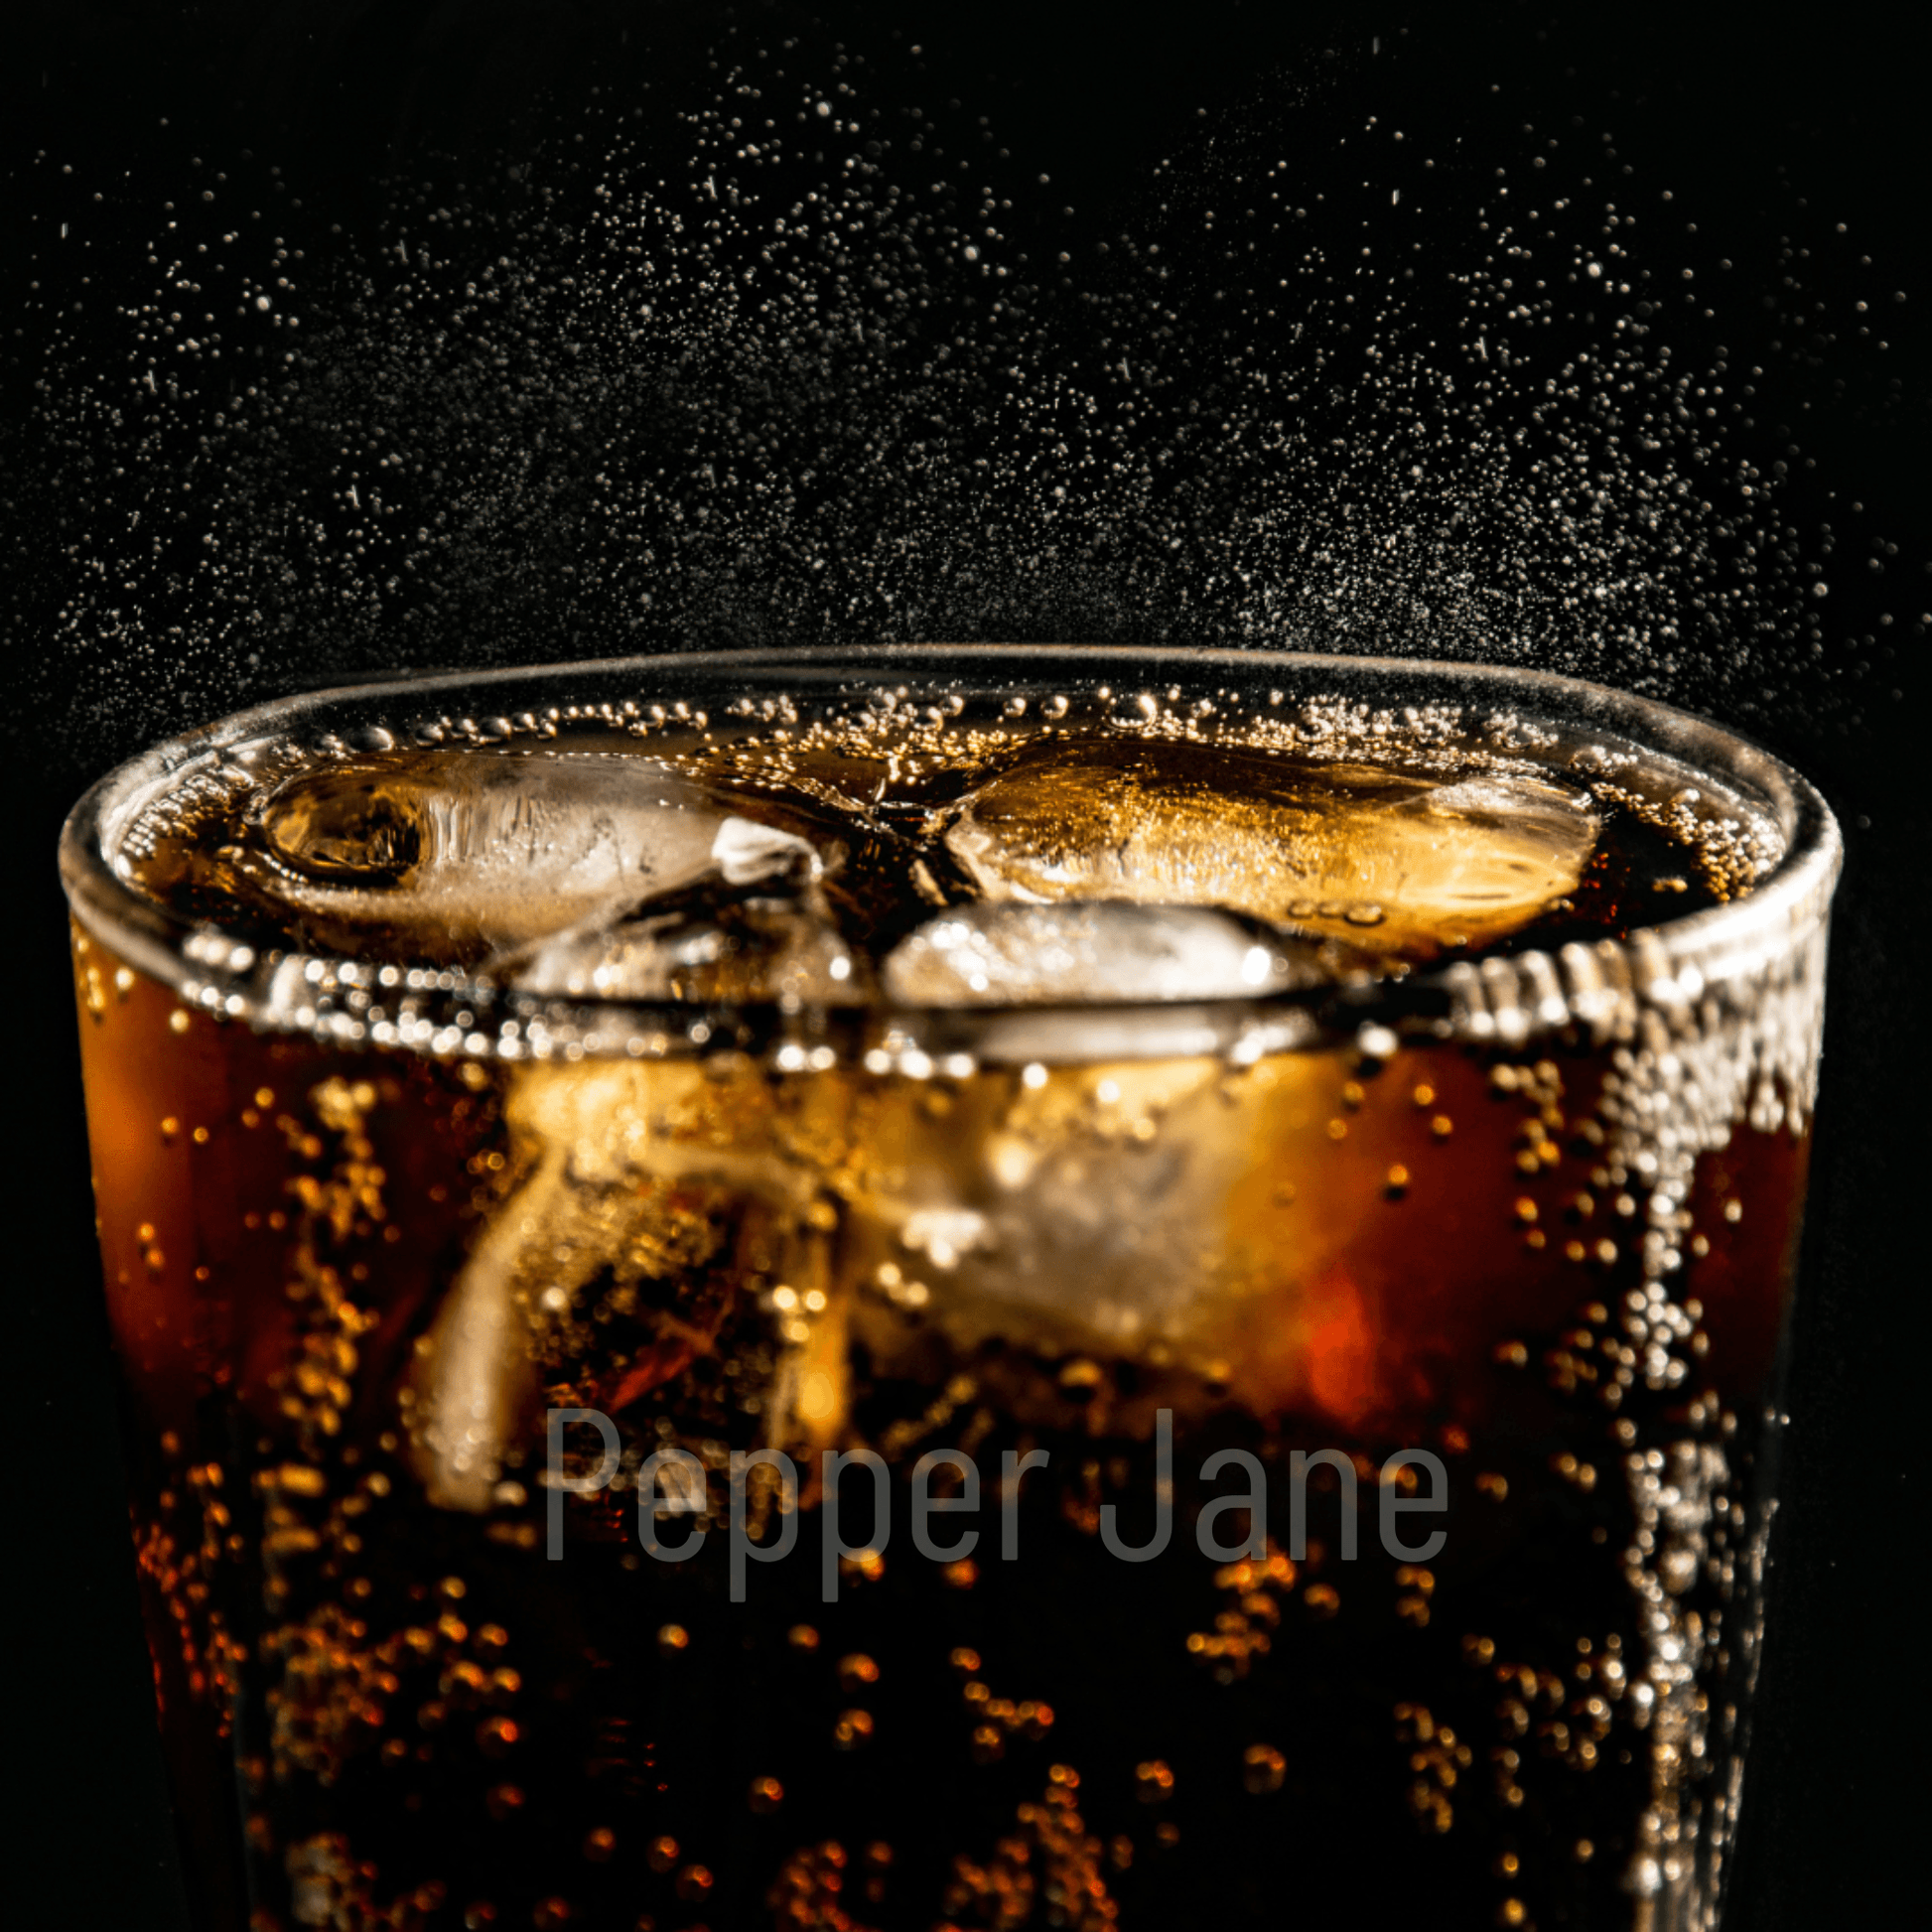 Fizzy Pepper Soda Fragrance Oil (Dr Pepper Type) - Pepper Jane's Colors and Scents